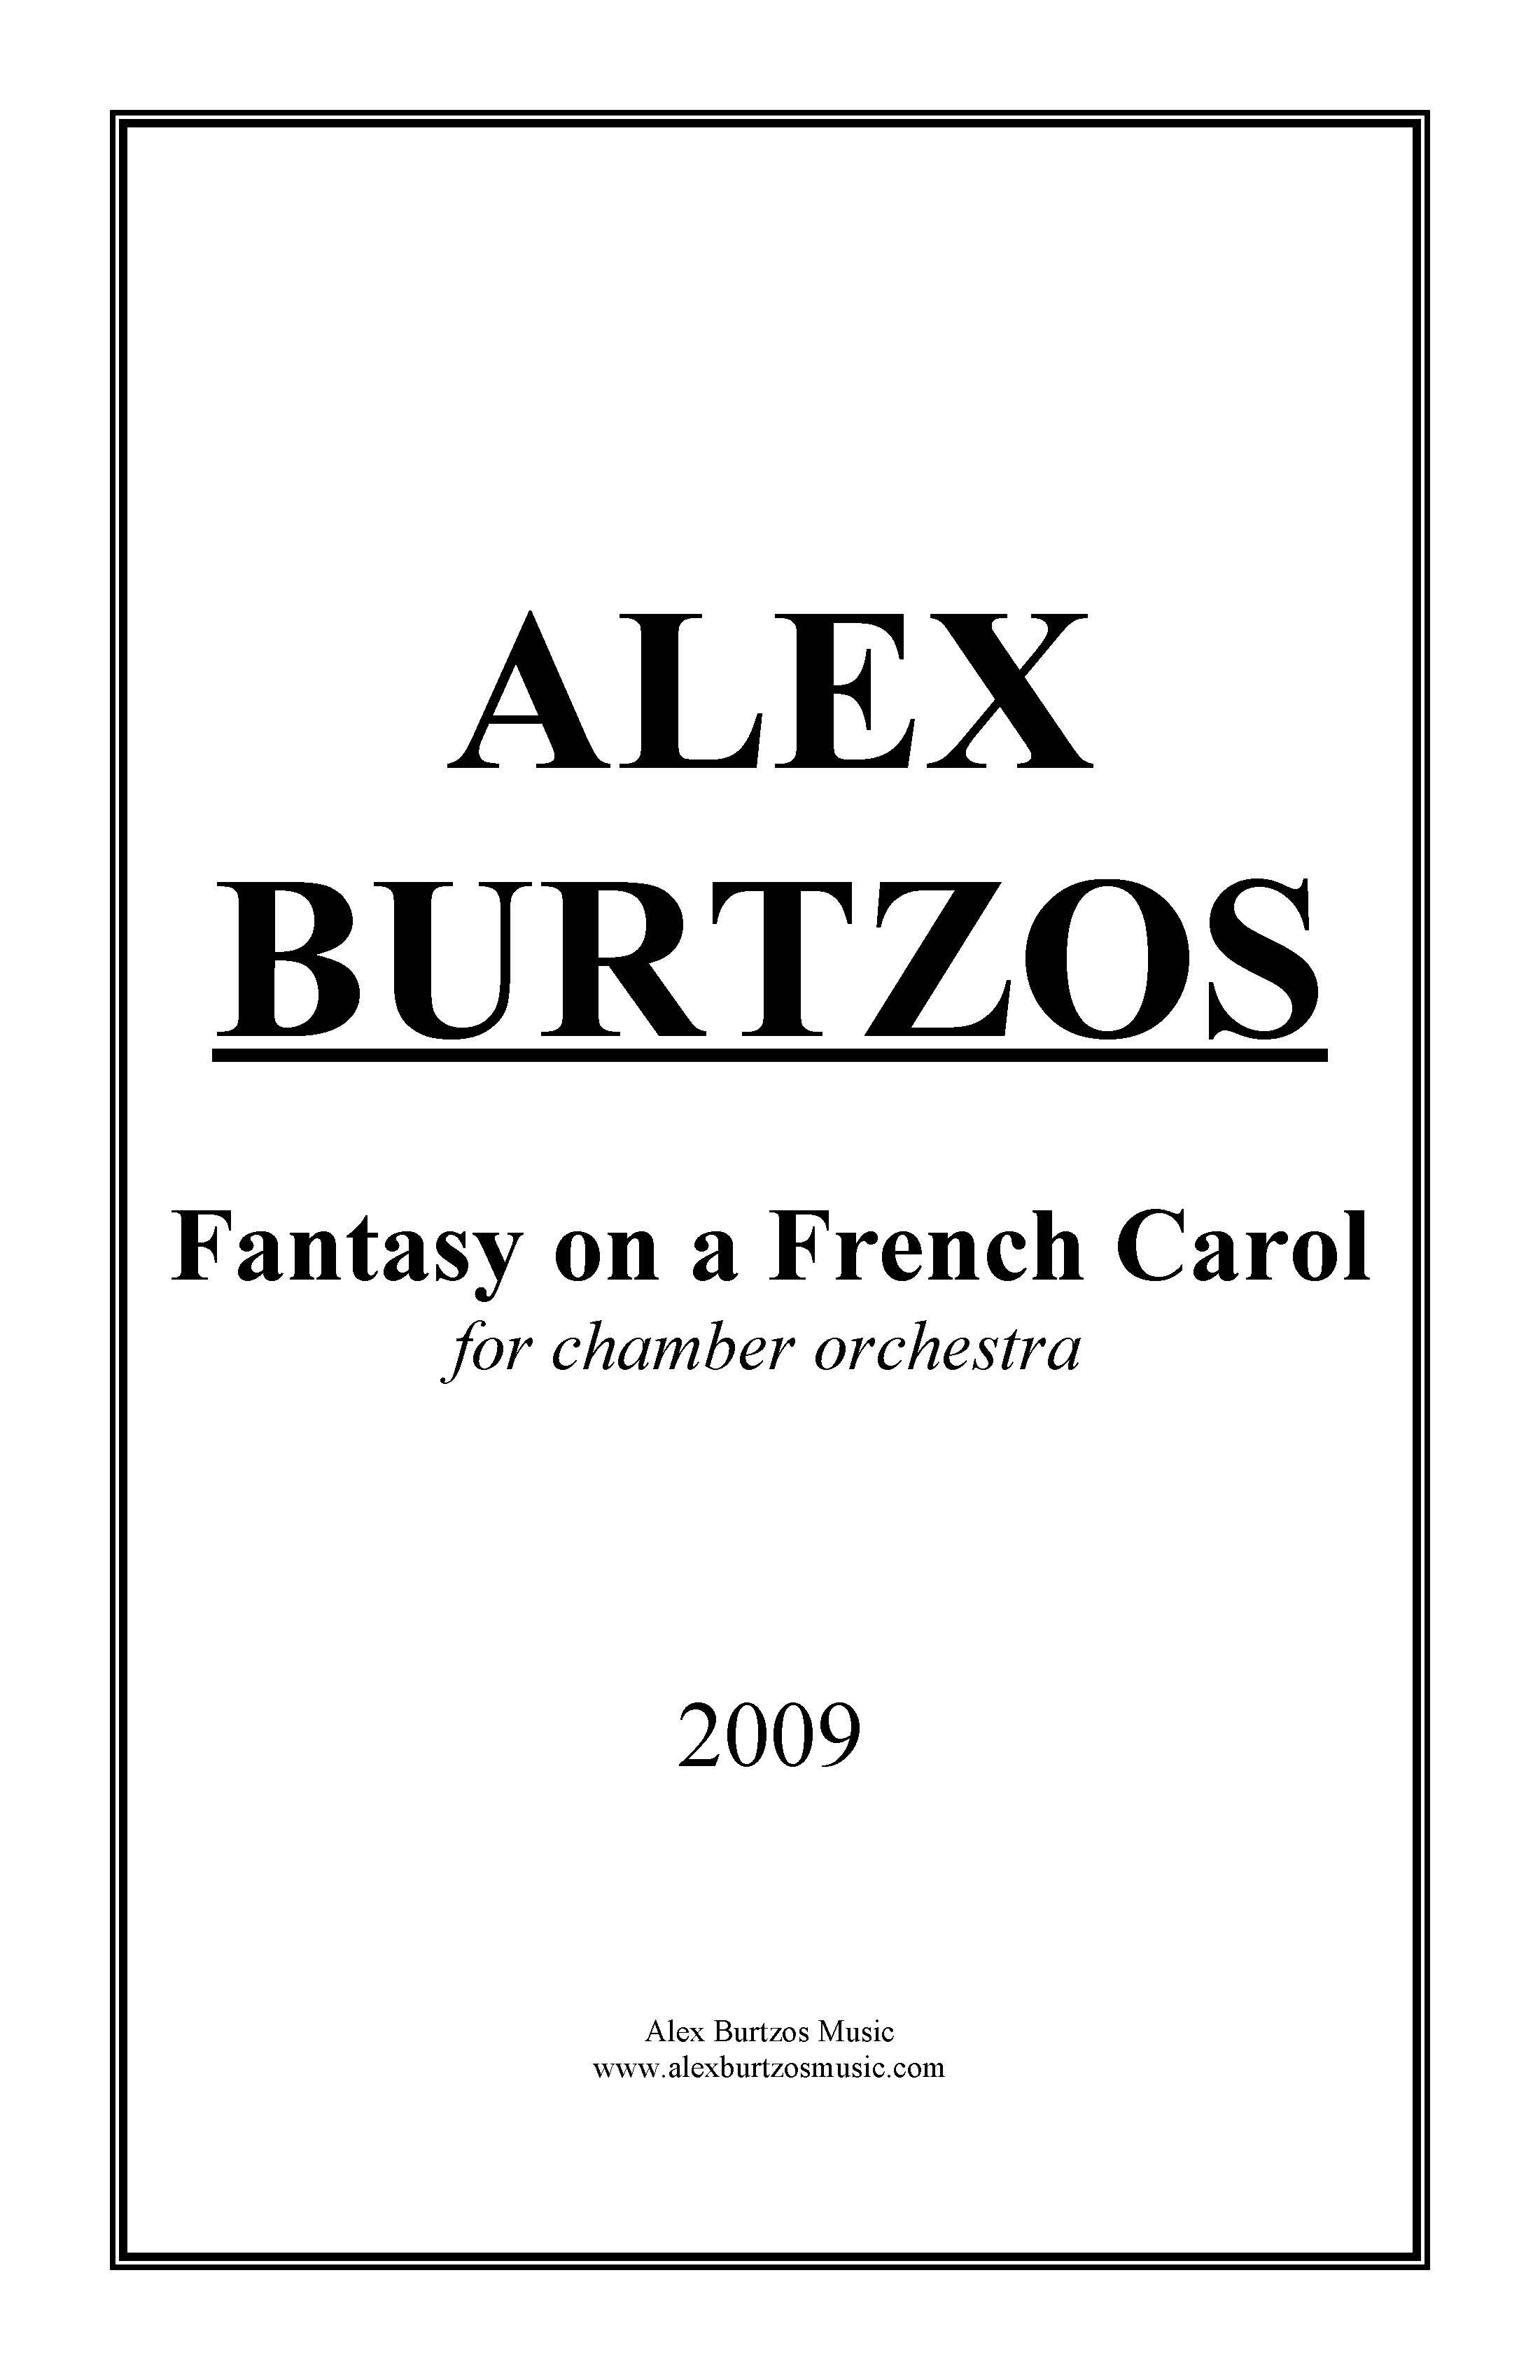 Fantasy on a French Carol - Complete Score_Page_01.jpg